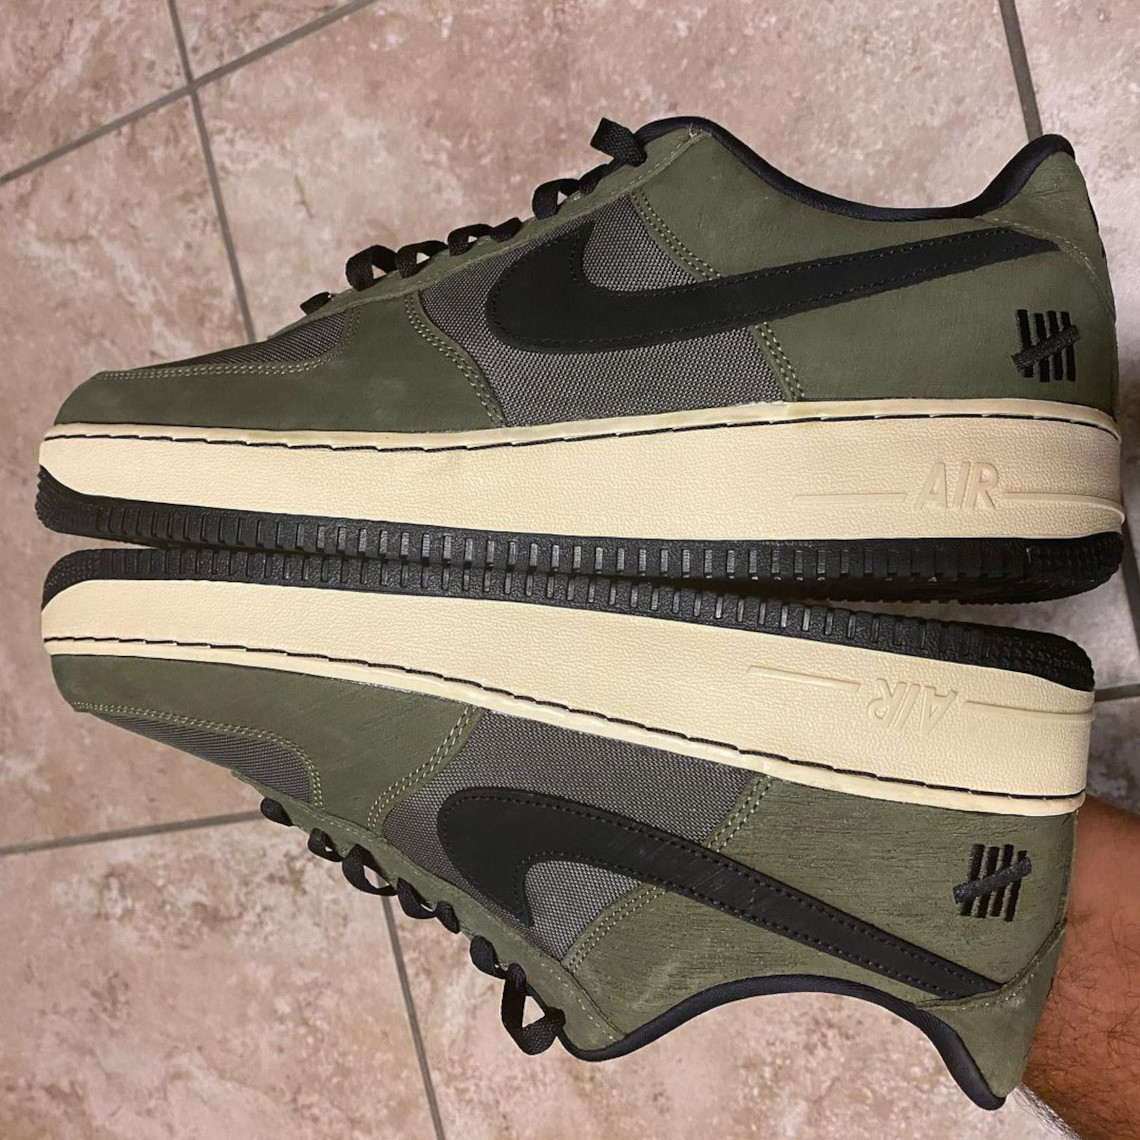 UNDEFEATED x Nike Air Force 1 Low "Ballistic"